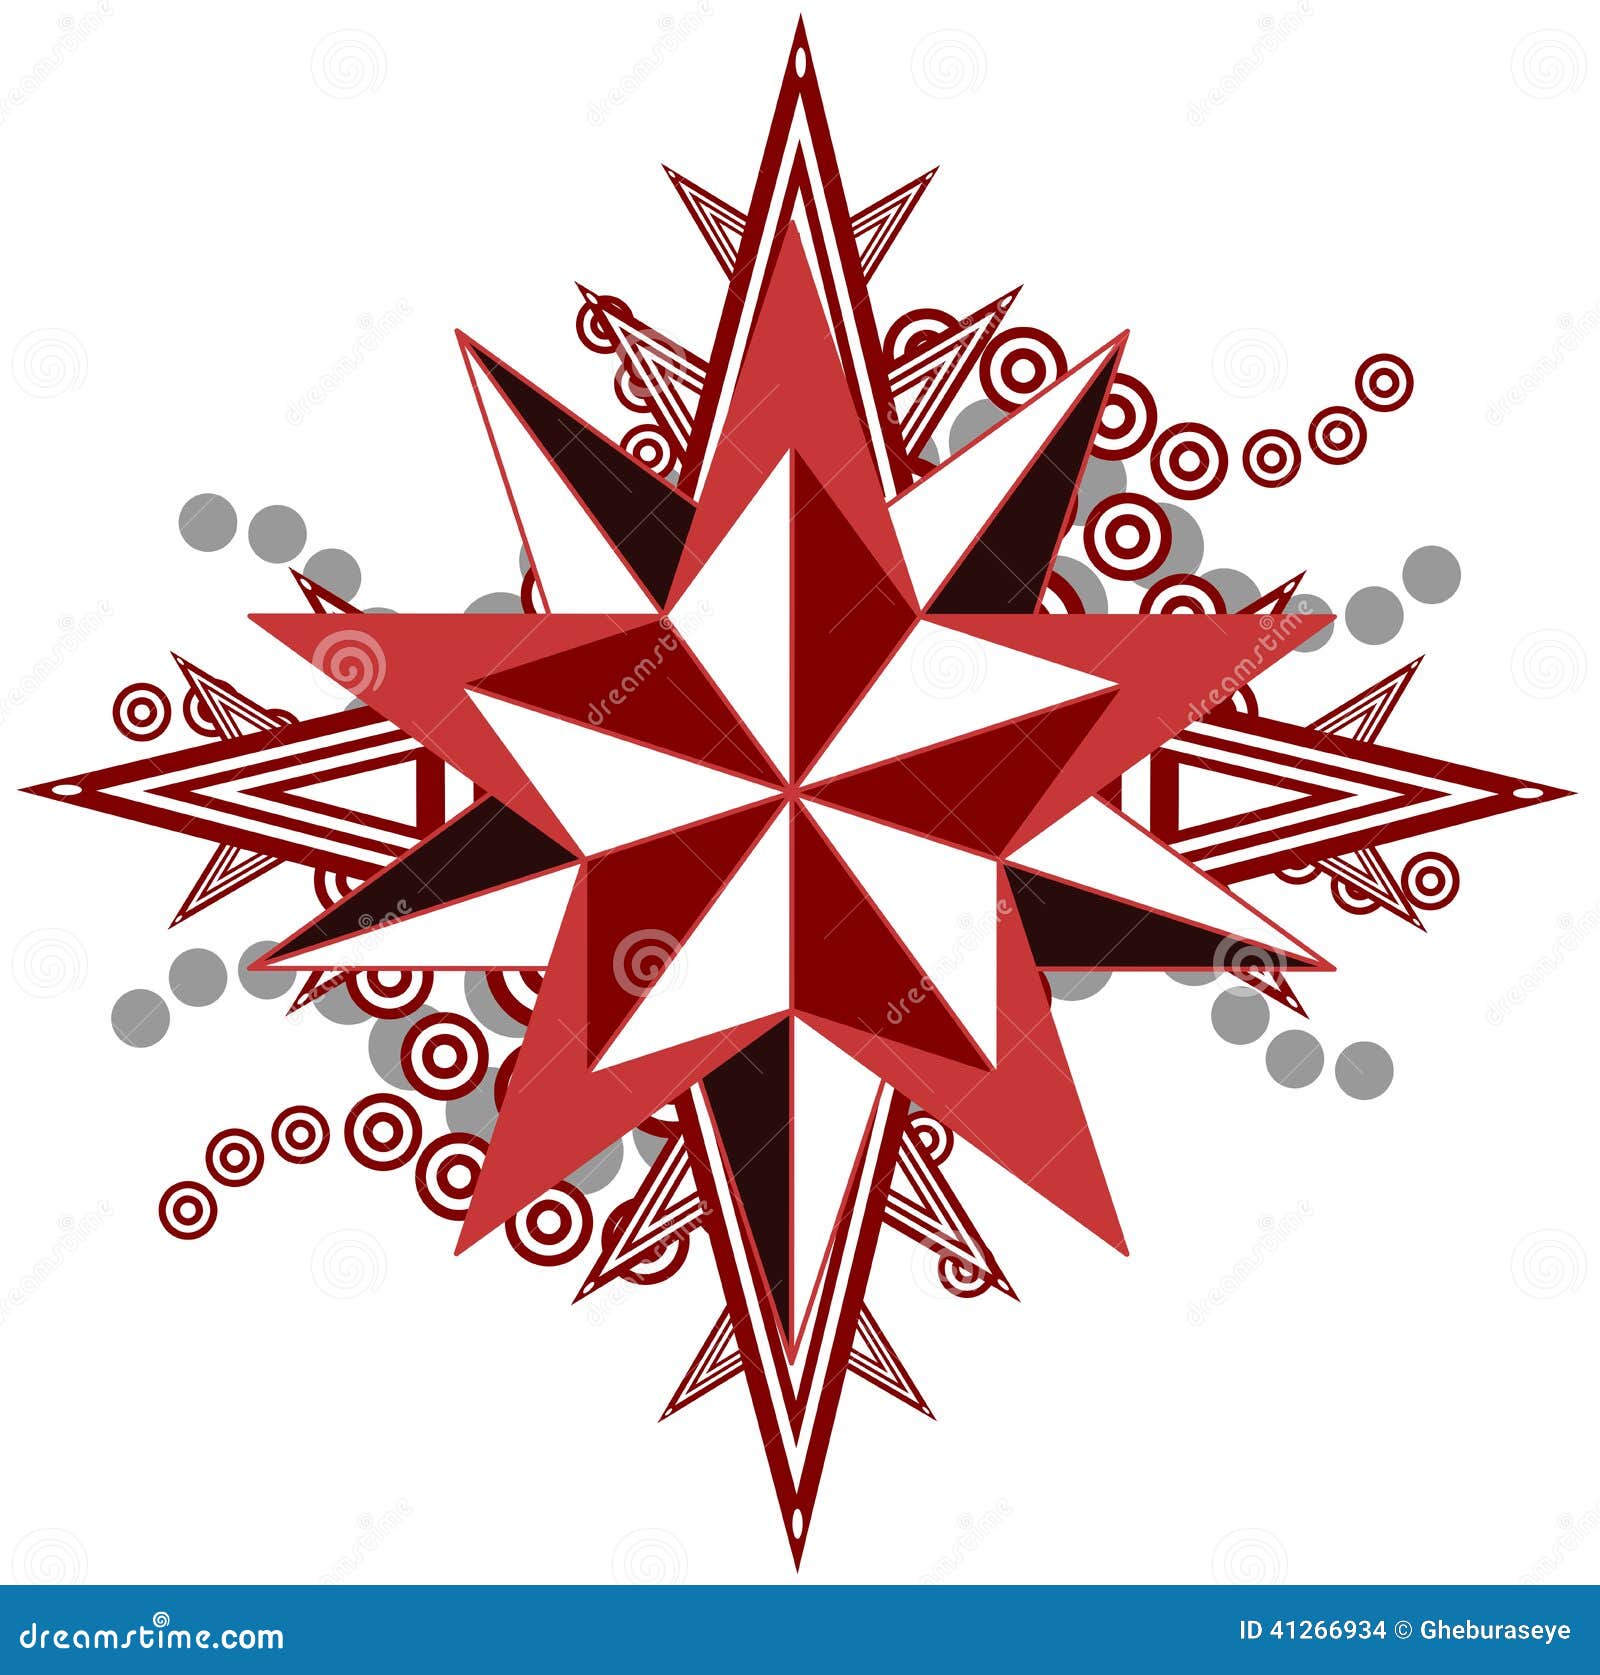 What is the meaning of a red and black star tattoo  Quora